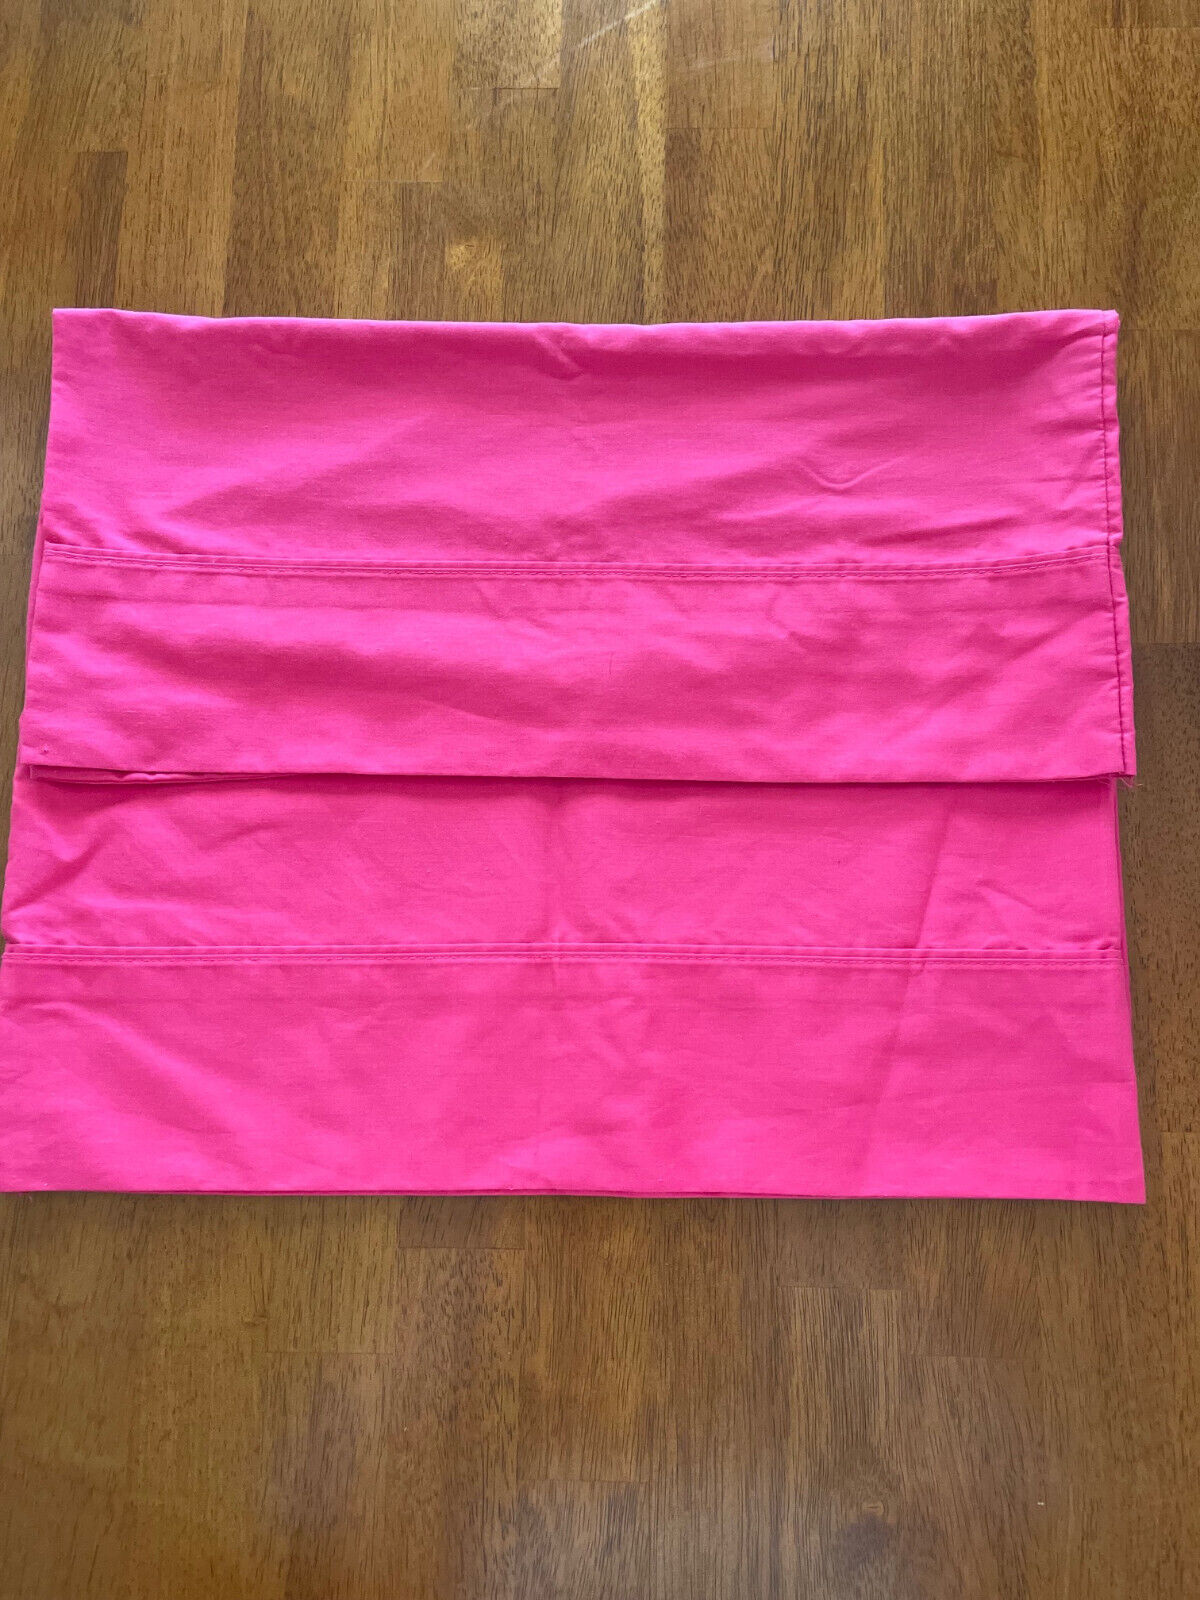 Pillowcases 2 Vintage Wamsutta Solid Pink Standard/Queen Cotton/Poly Blend